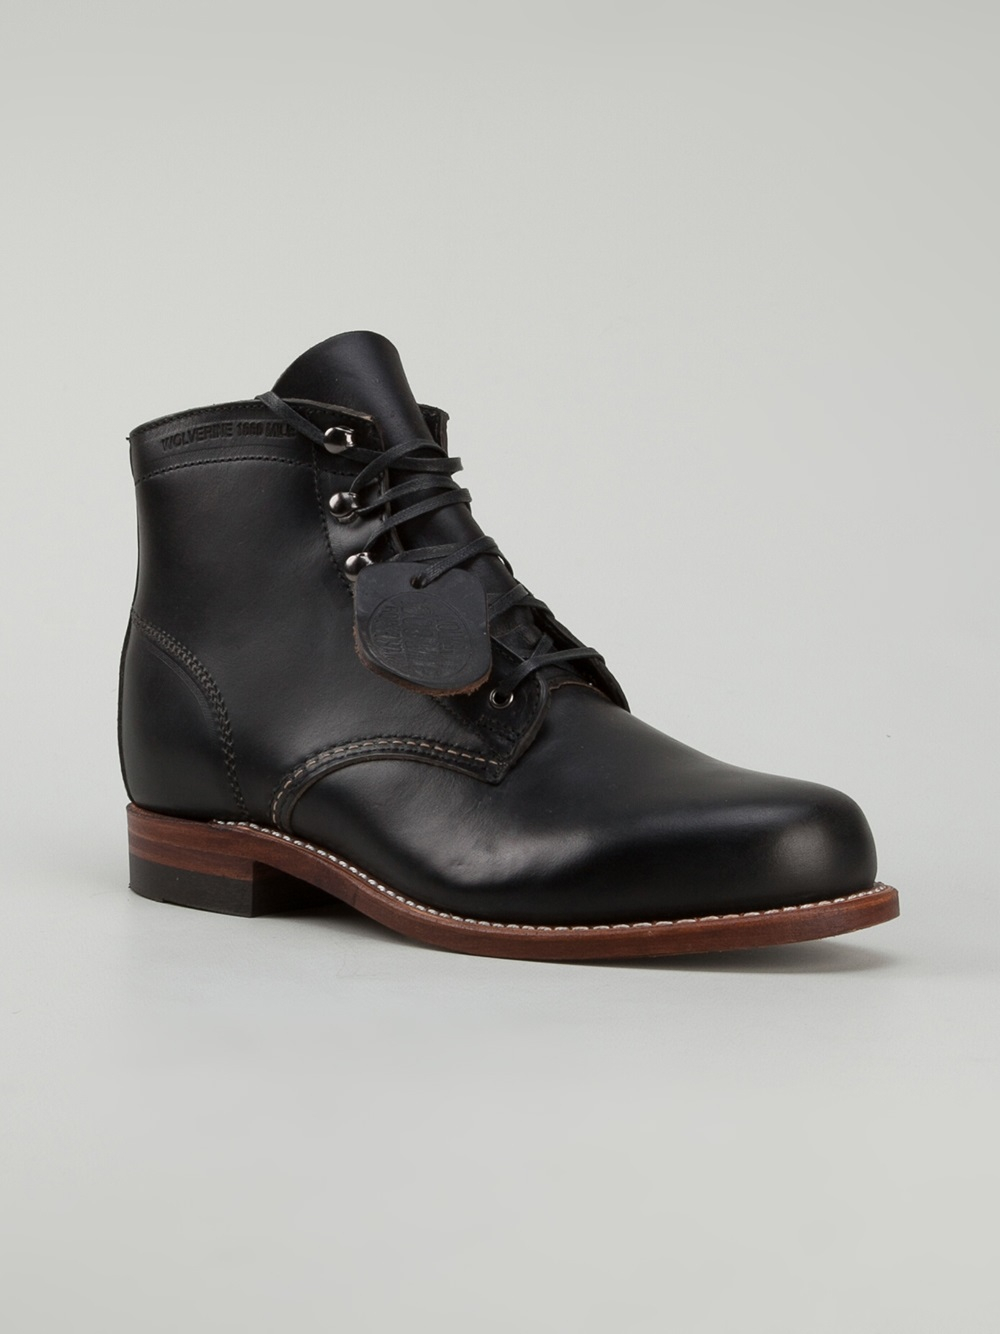 Wolverine '1000 Mile' Boot in Black | Lyst